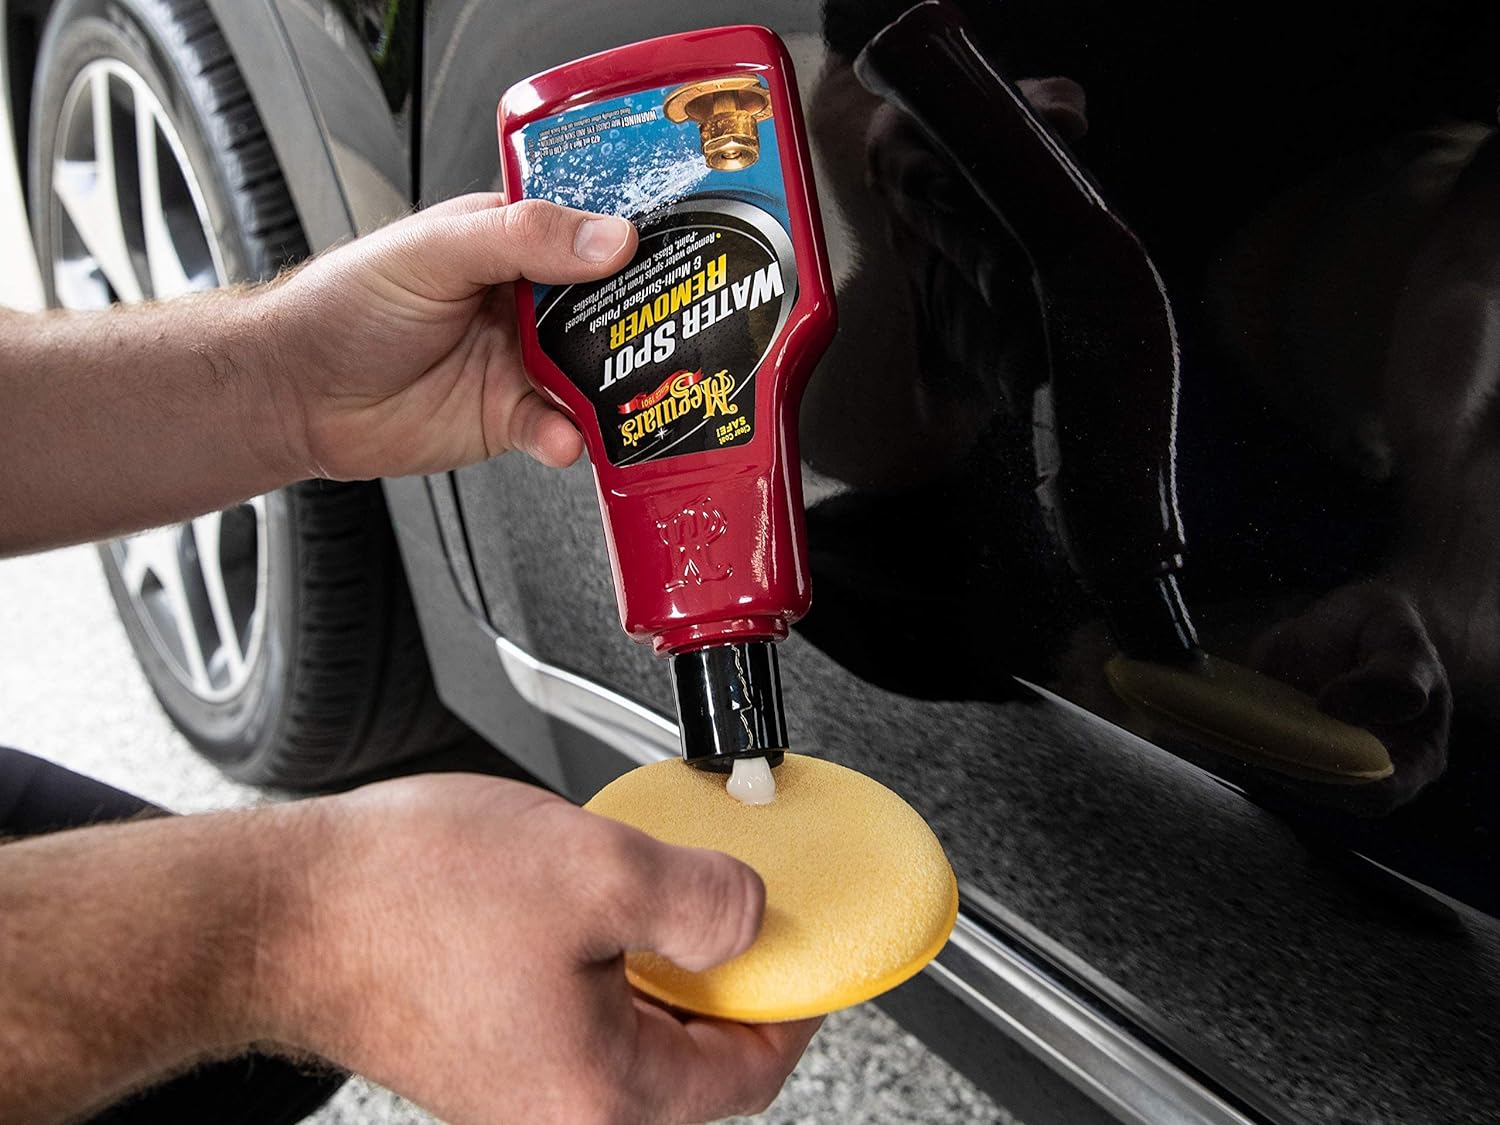 Meguiars A3714 Water Spot Remover - Water Stain Remover and Polish for All Hard Surfaces, 16 oz